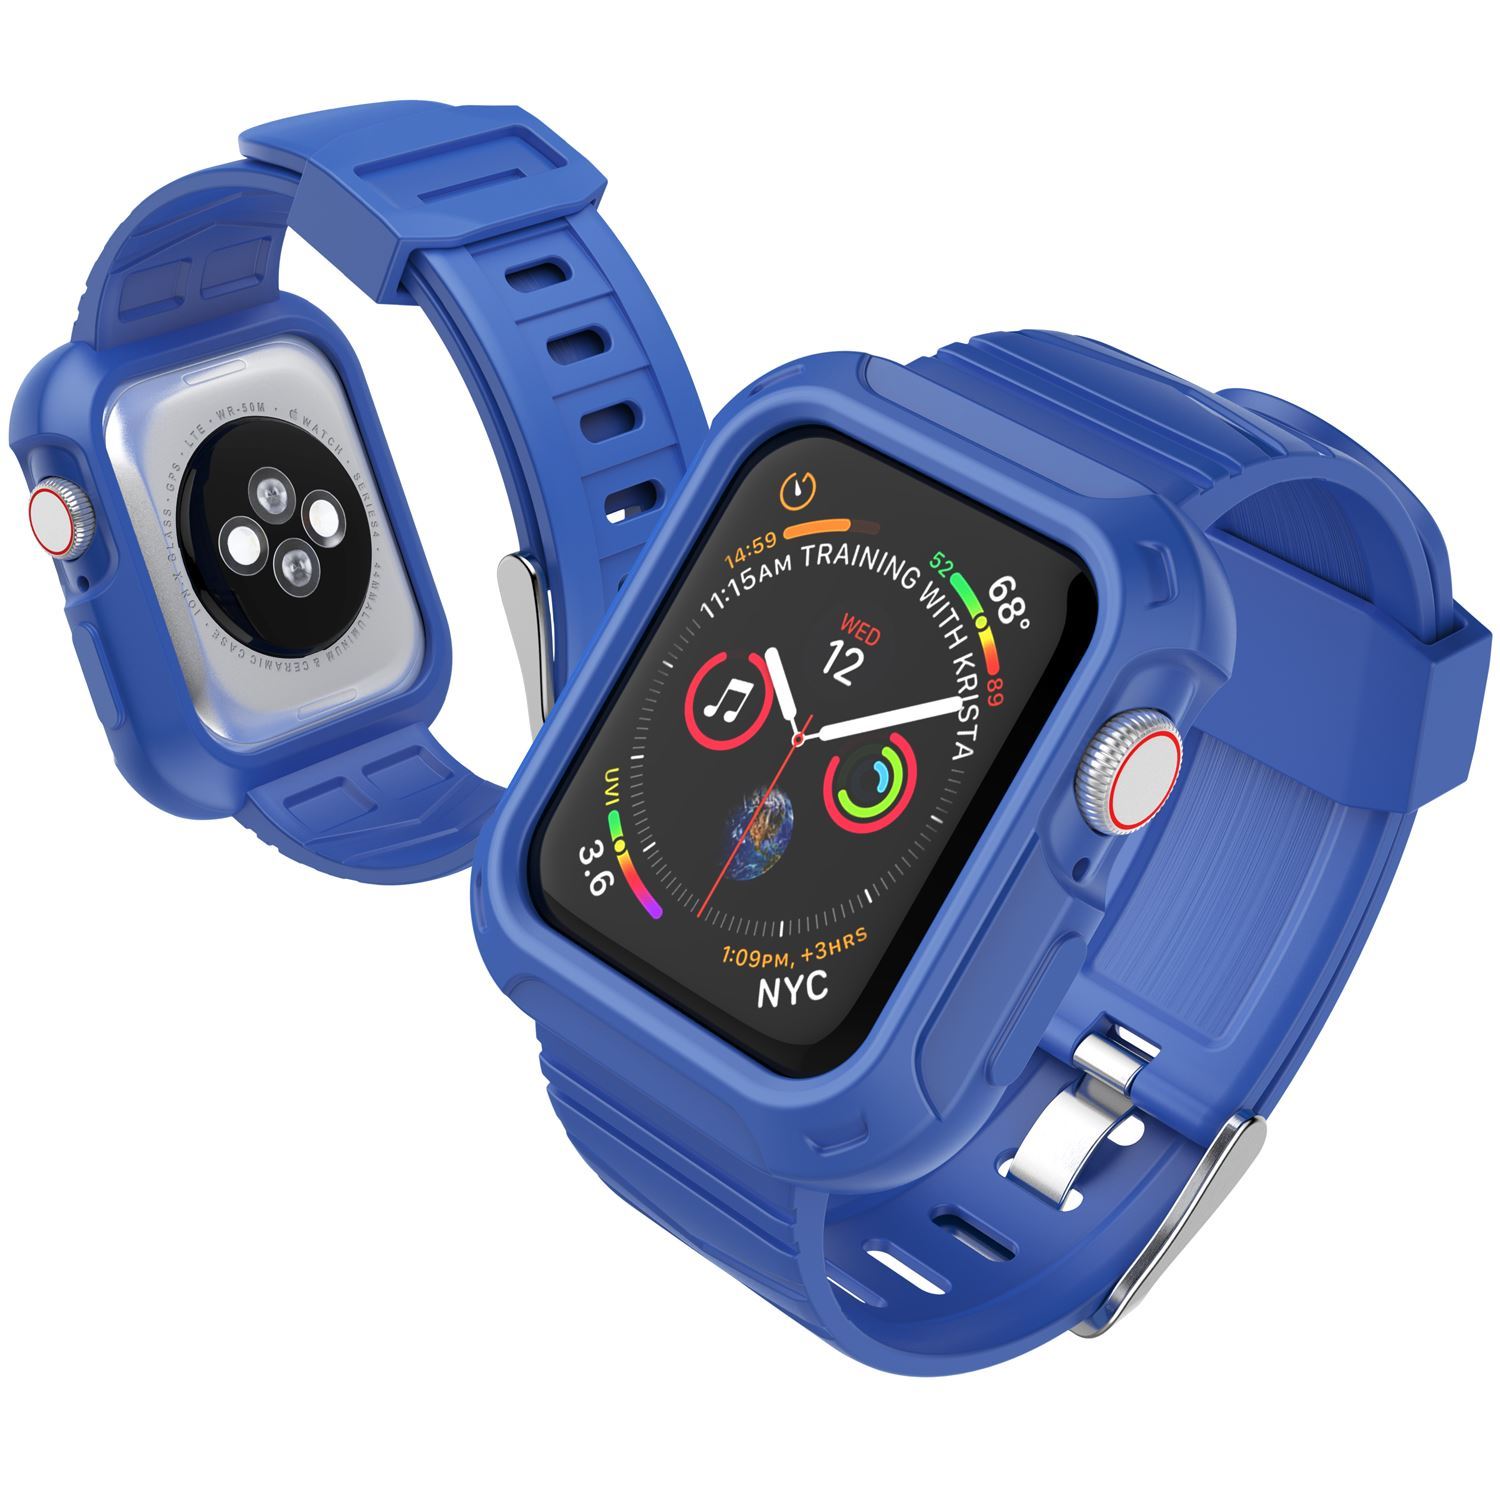 Silicone Sport Band Strap+Case for Apple Watch Series 5/4/3/2/1 42/38/40/44mm ebizware 38mm (Series 3/2/1) Blue (Series 5/4) iwatch Band and Case